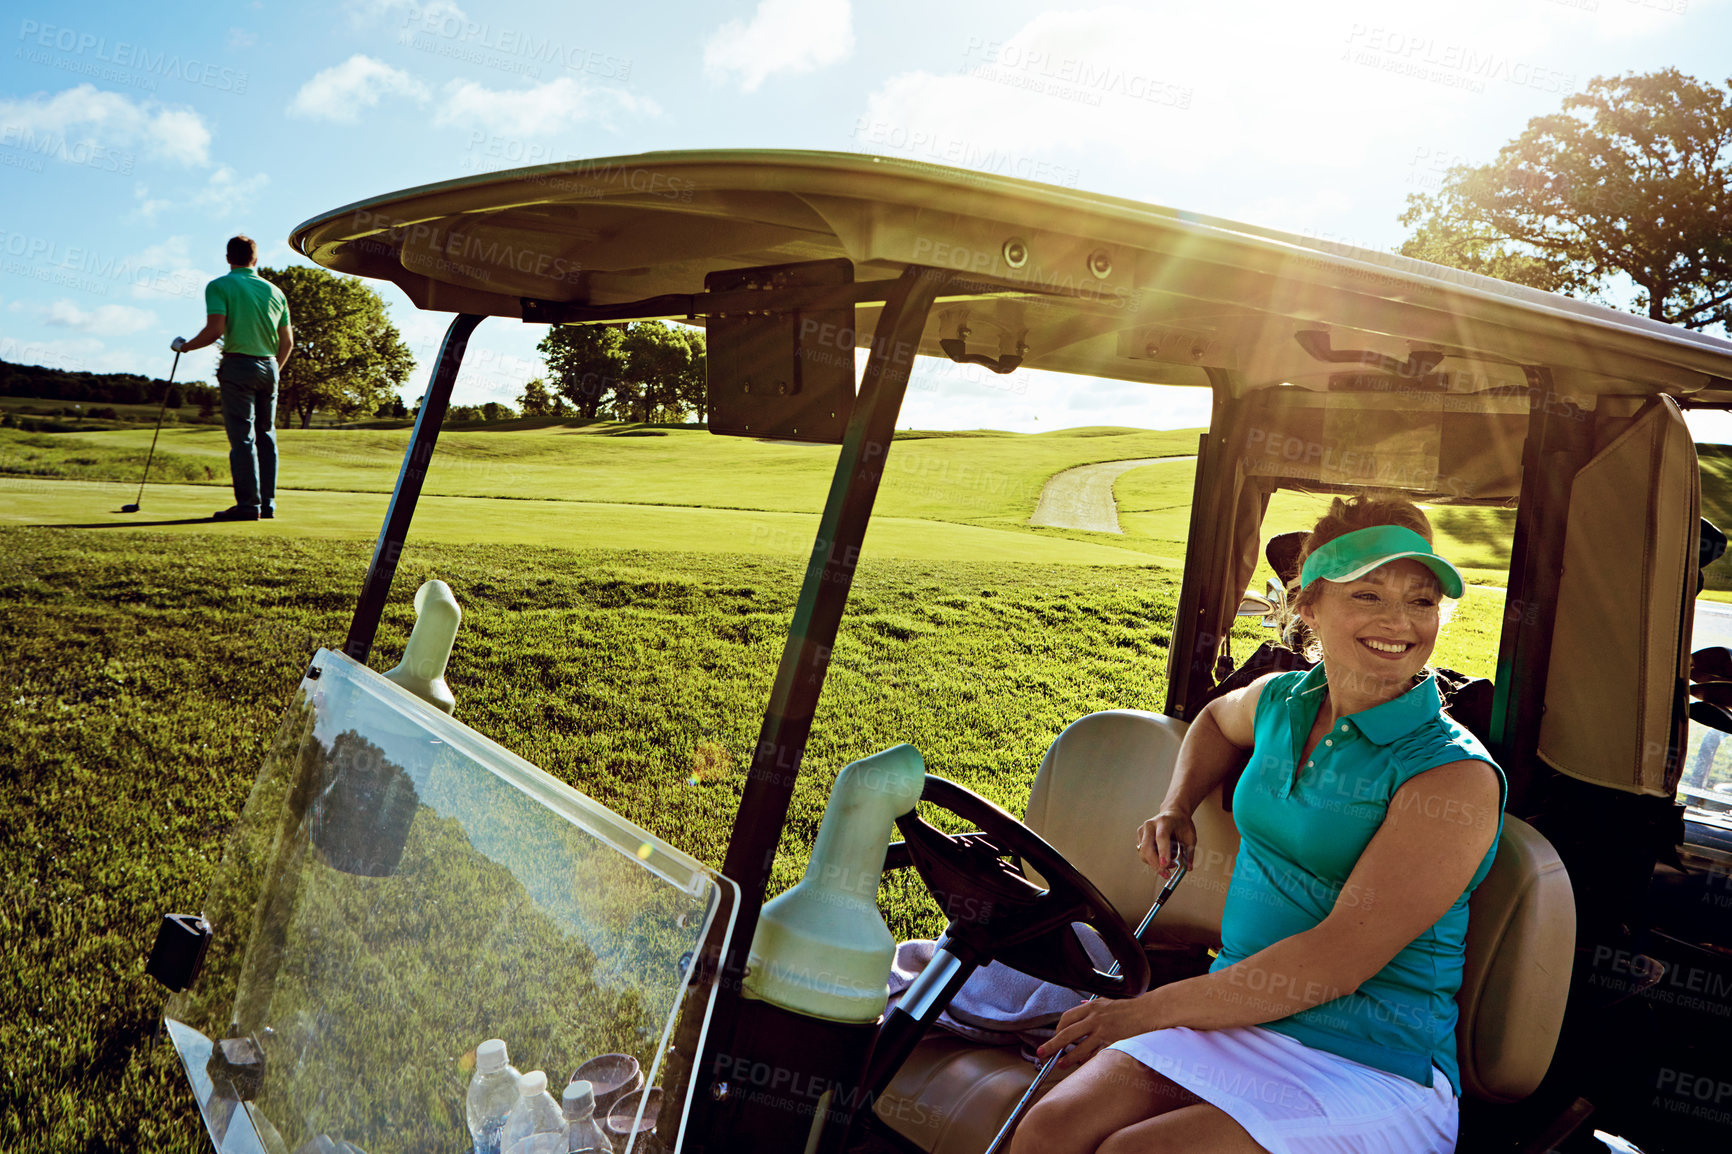 Buy stock photo Shot of woman sitting in a golf cart on the fairway